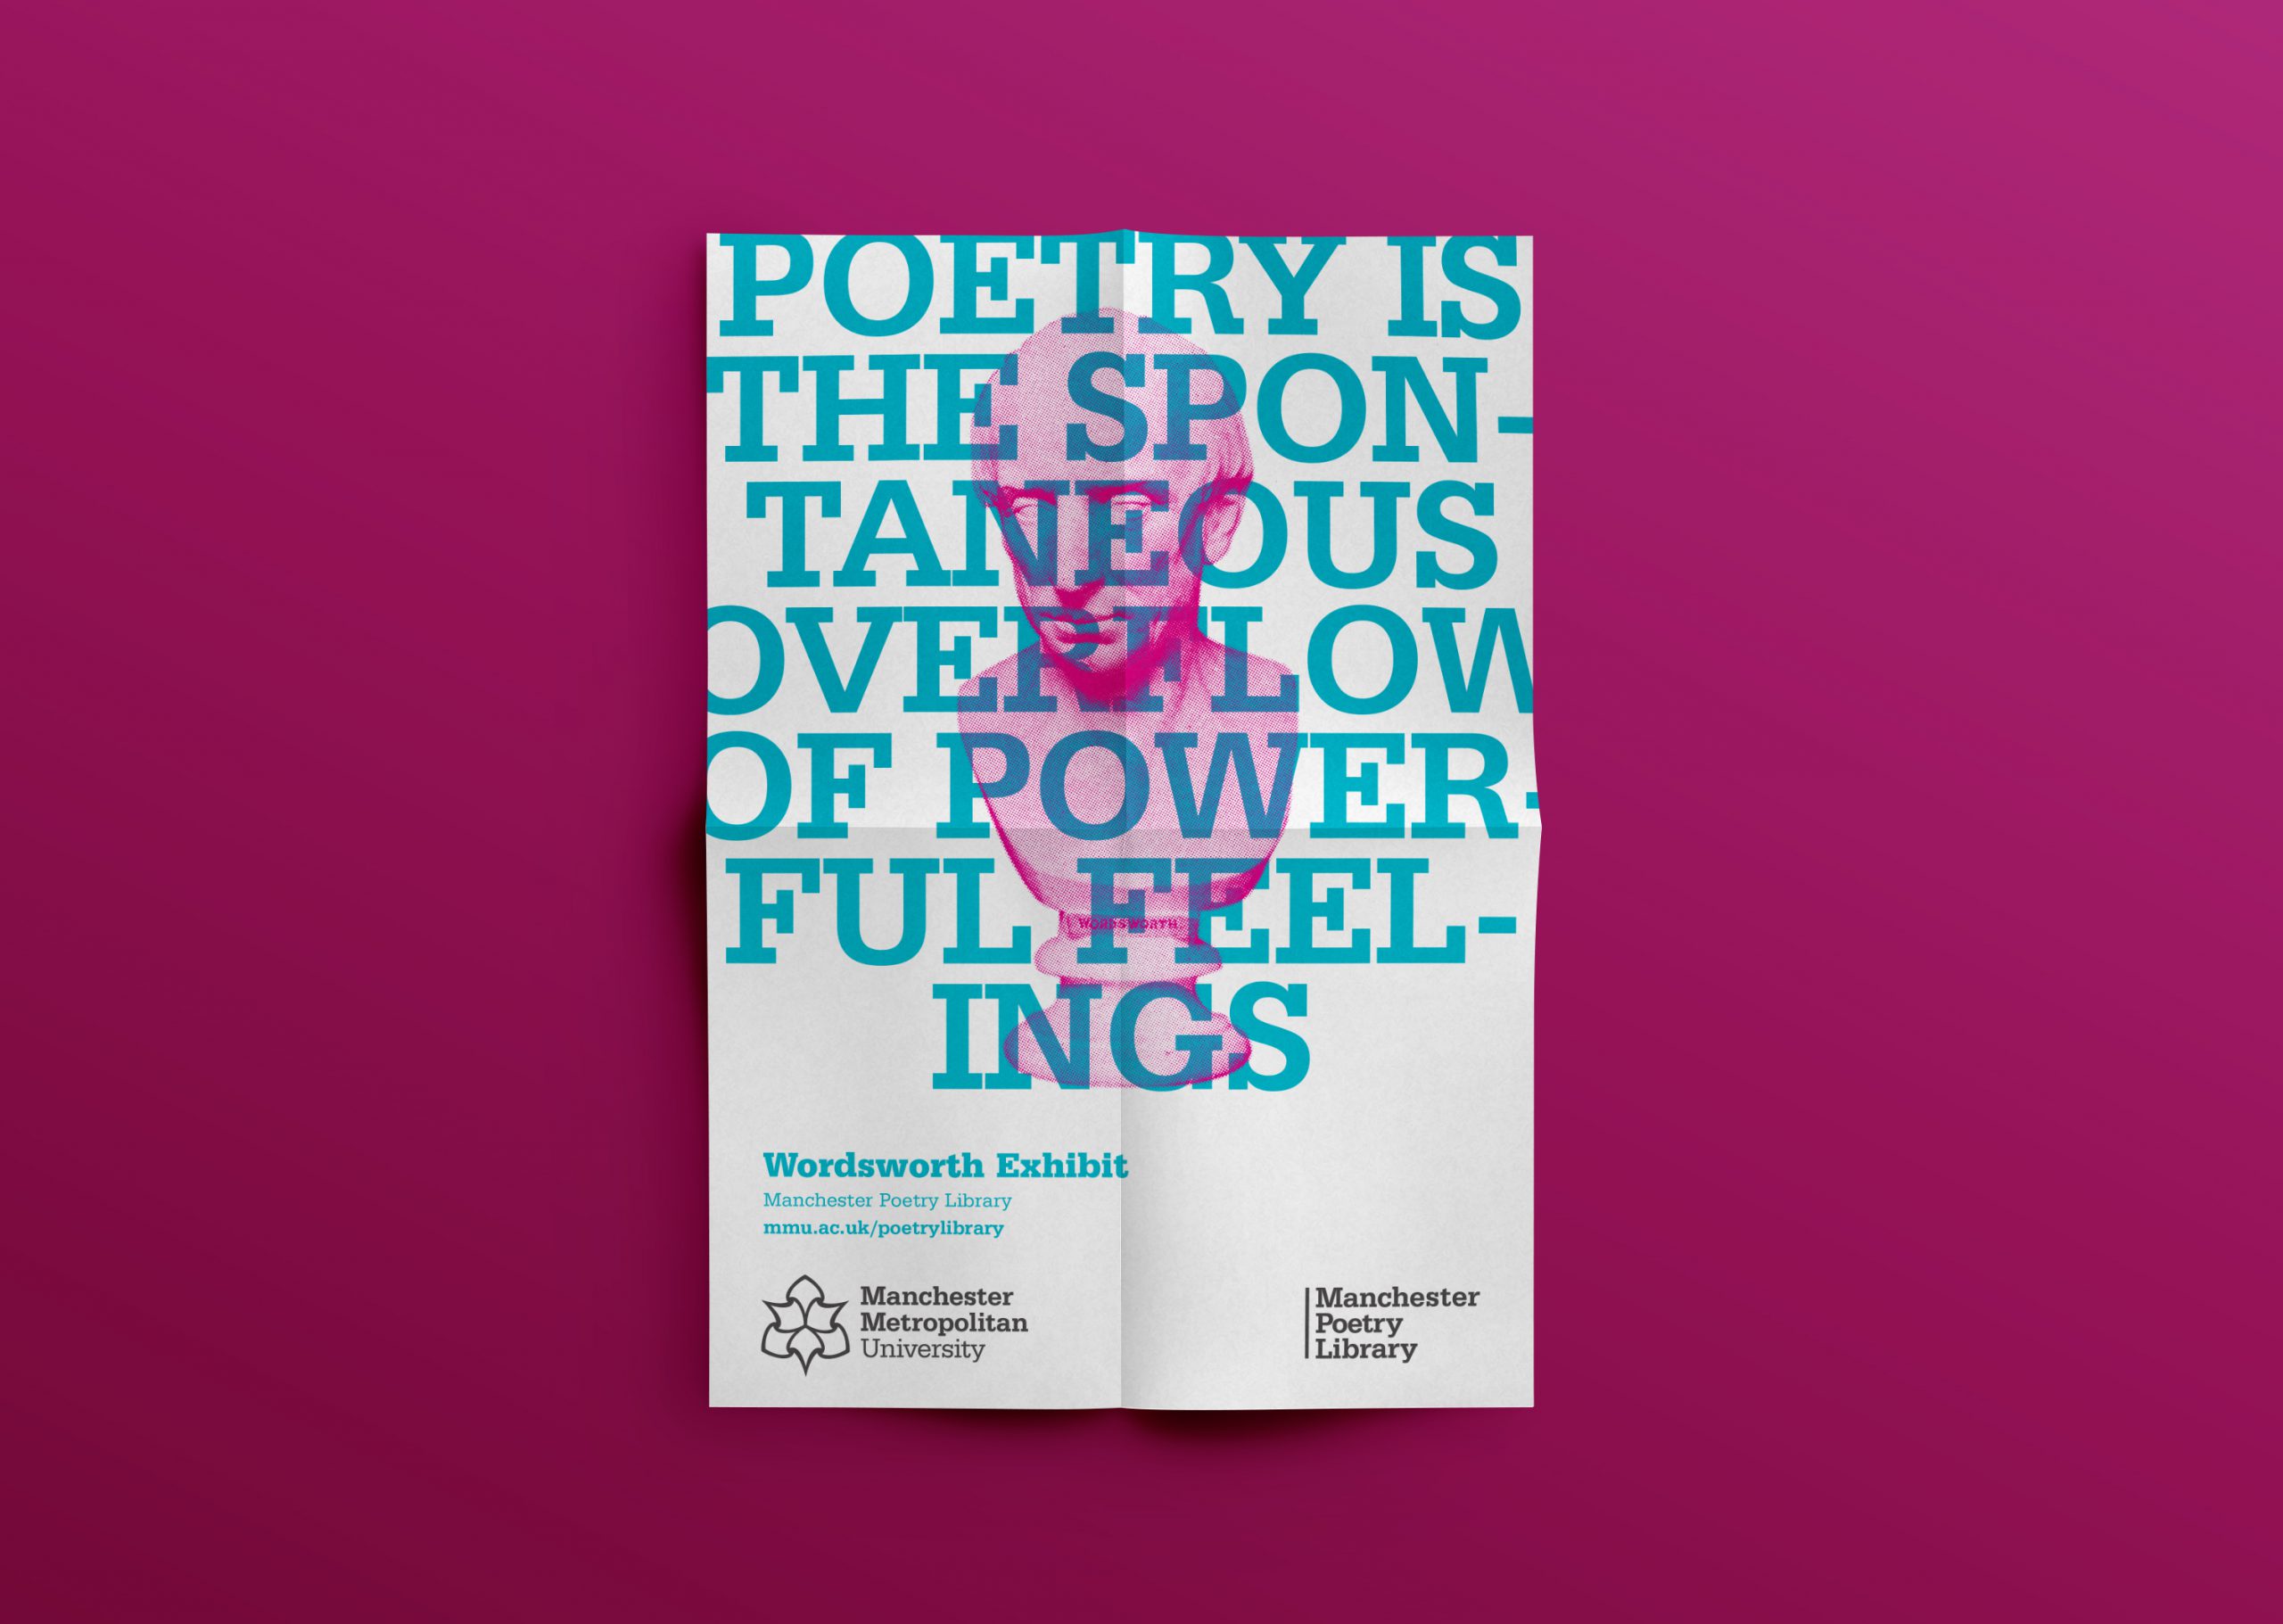 poster with print of pink bust of wordsworth and the words 'poetry is the spontaneous overflow of powerful feelings'